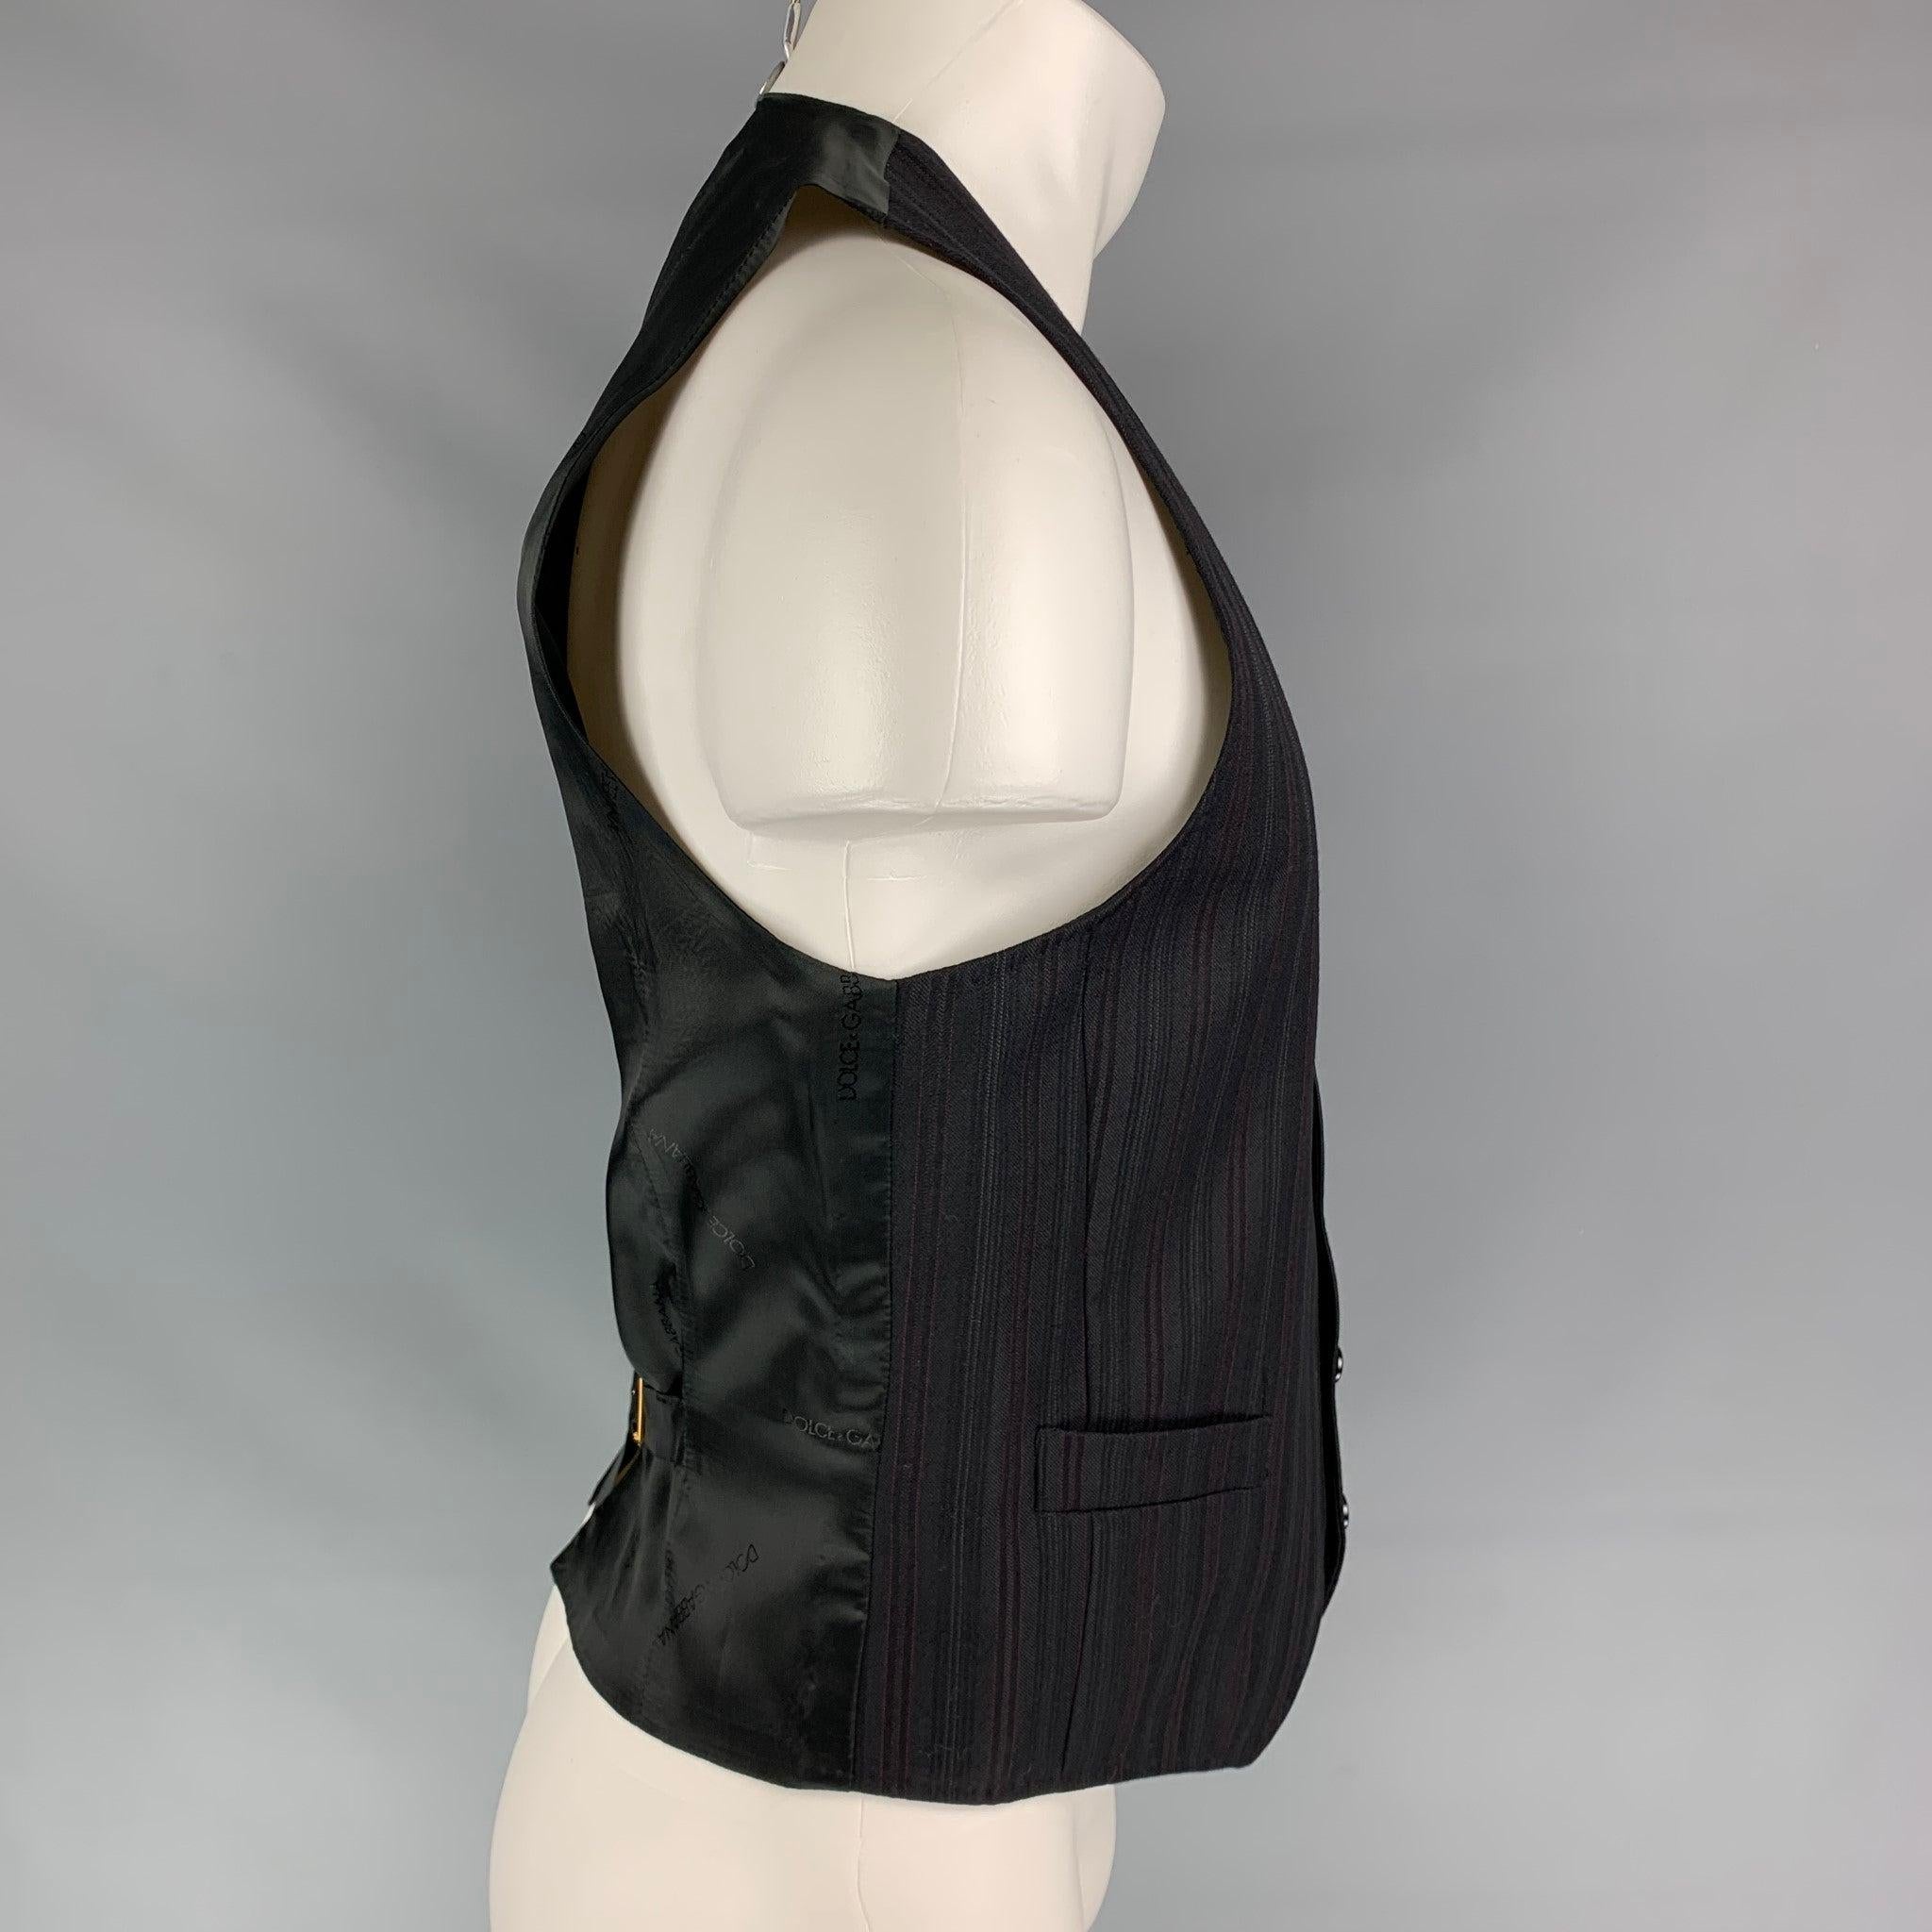 DOLCE & GABBANA vest comes in a black & burgundy stripe wool featuring a classic style, back belt, slit pockets, and a buttoned closure. Made in Italy.
Very Good
Pre-Owned Condition. 

Marked:   48 

Measurements: 
 
Shoulder: 13.5 inches  Chest: 38